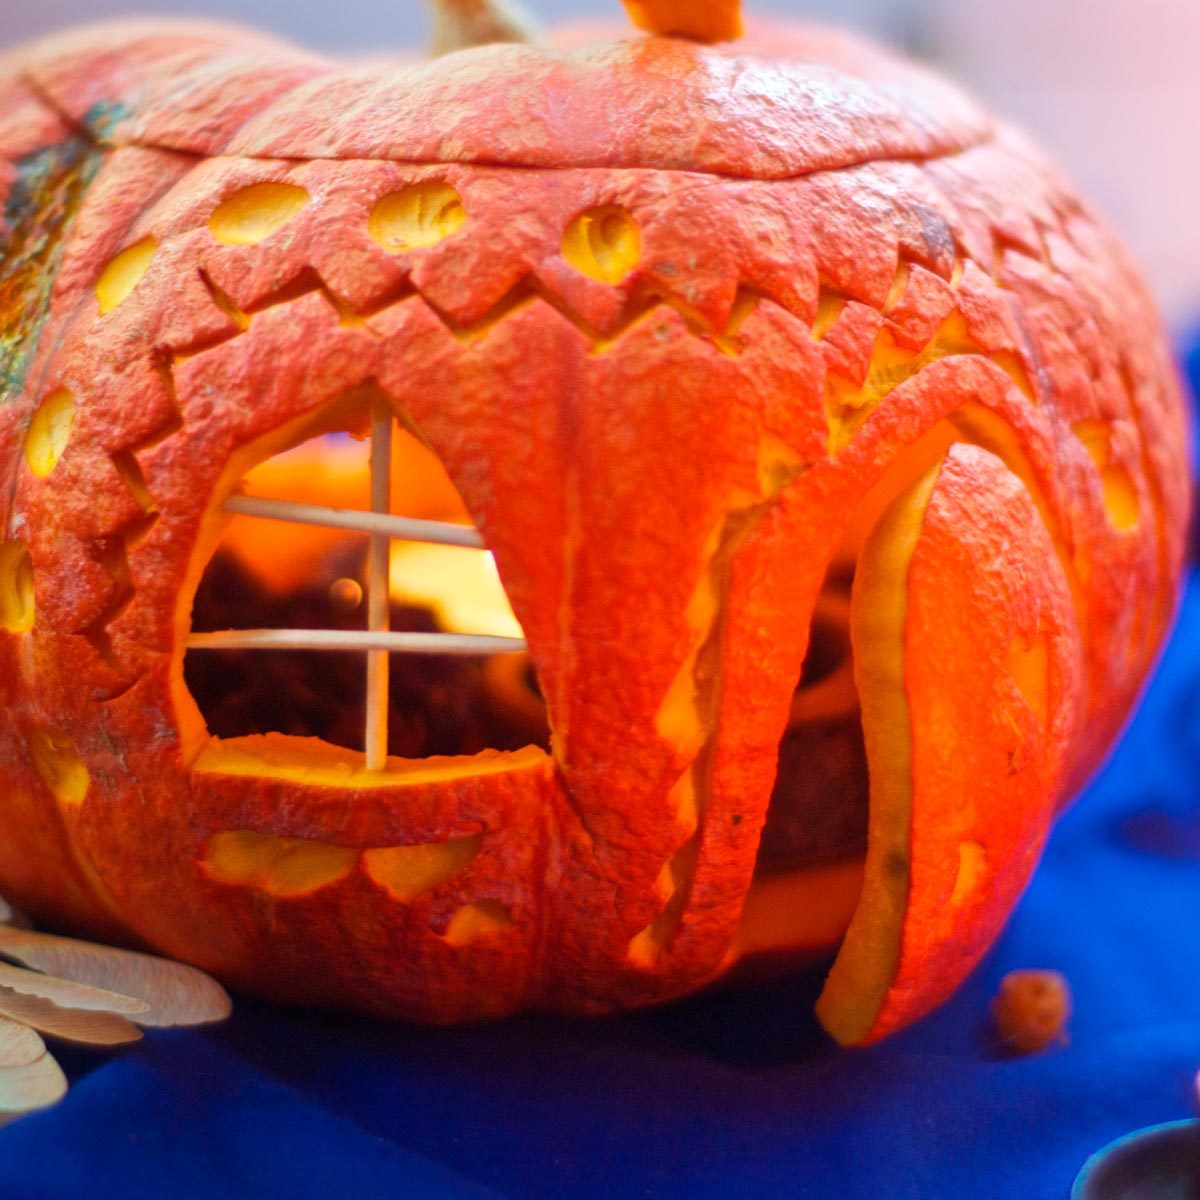 20 Pumpkin Carving Ideas to Inspire You this Halloween | Family Handyman